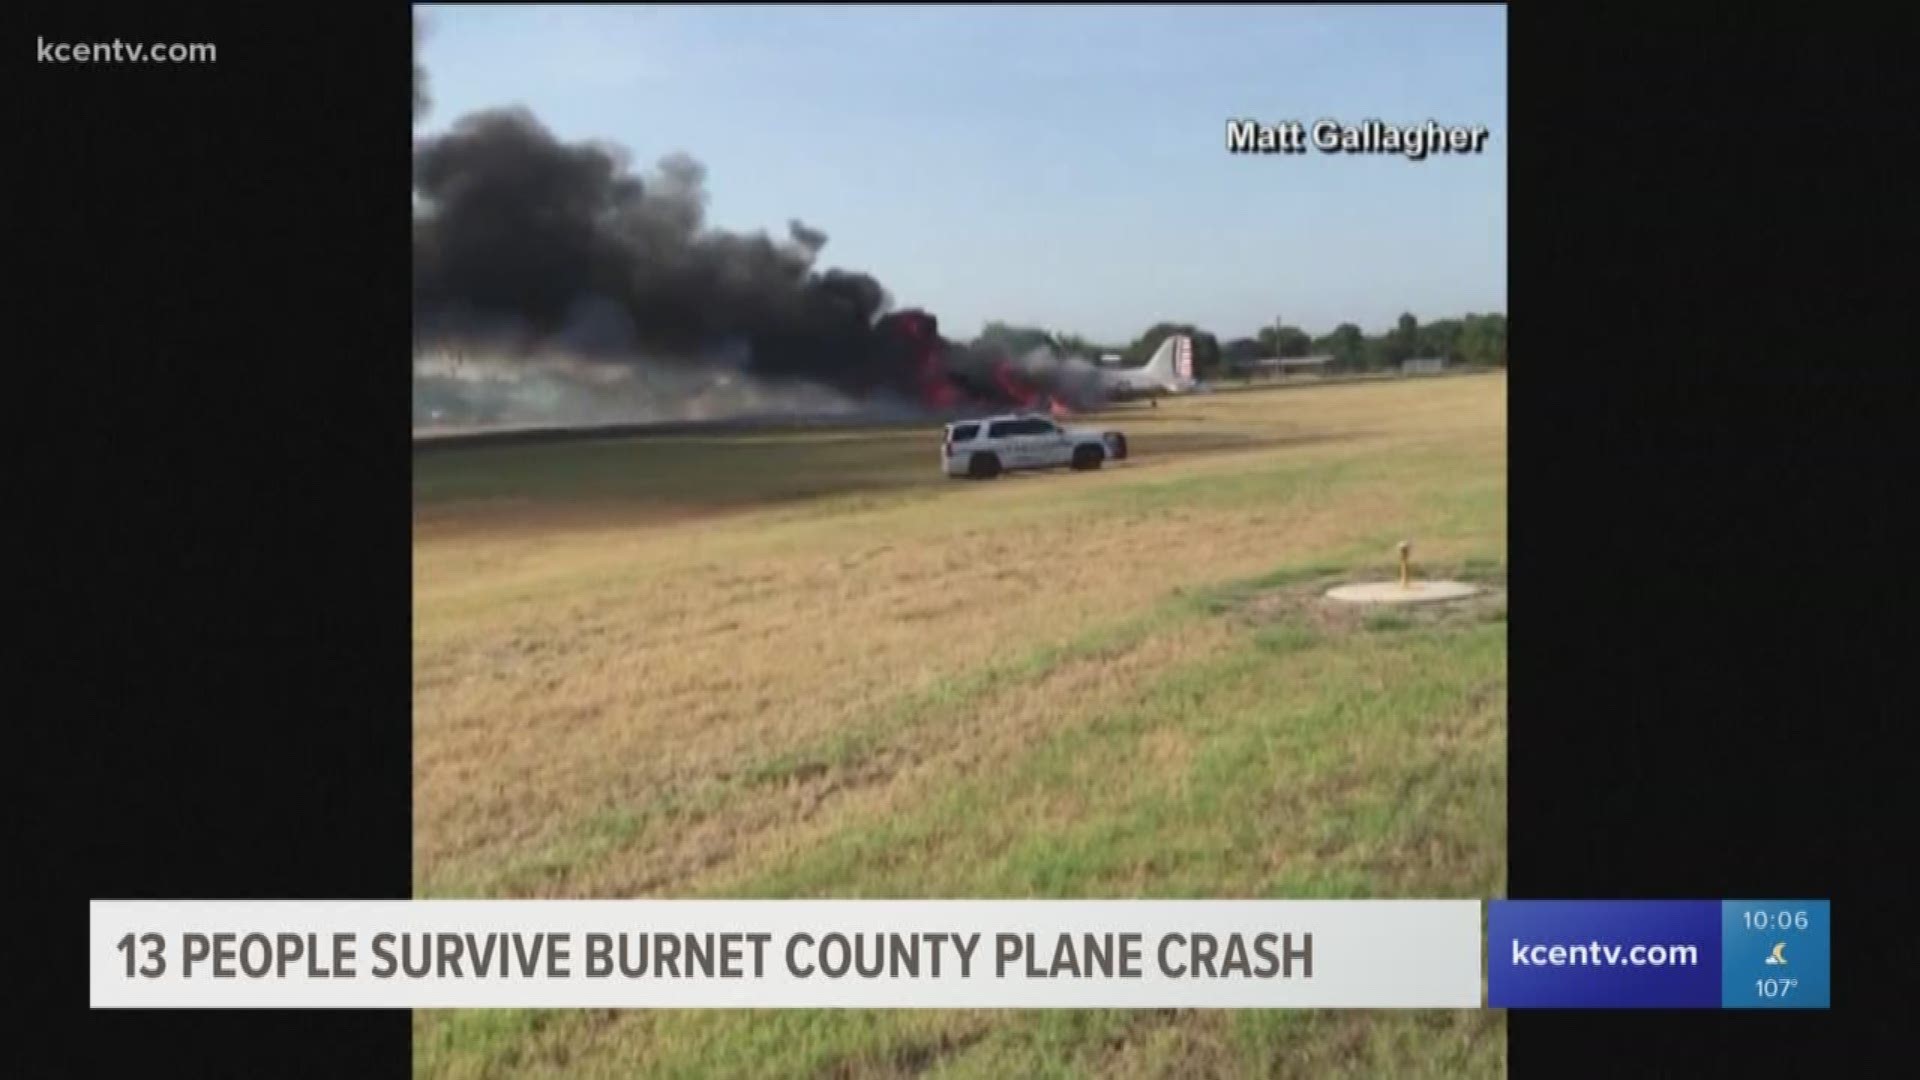 The plane crashed while attempting takeoff.